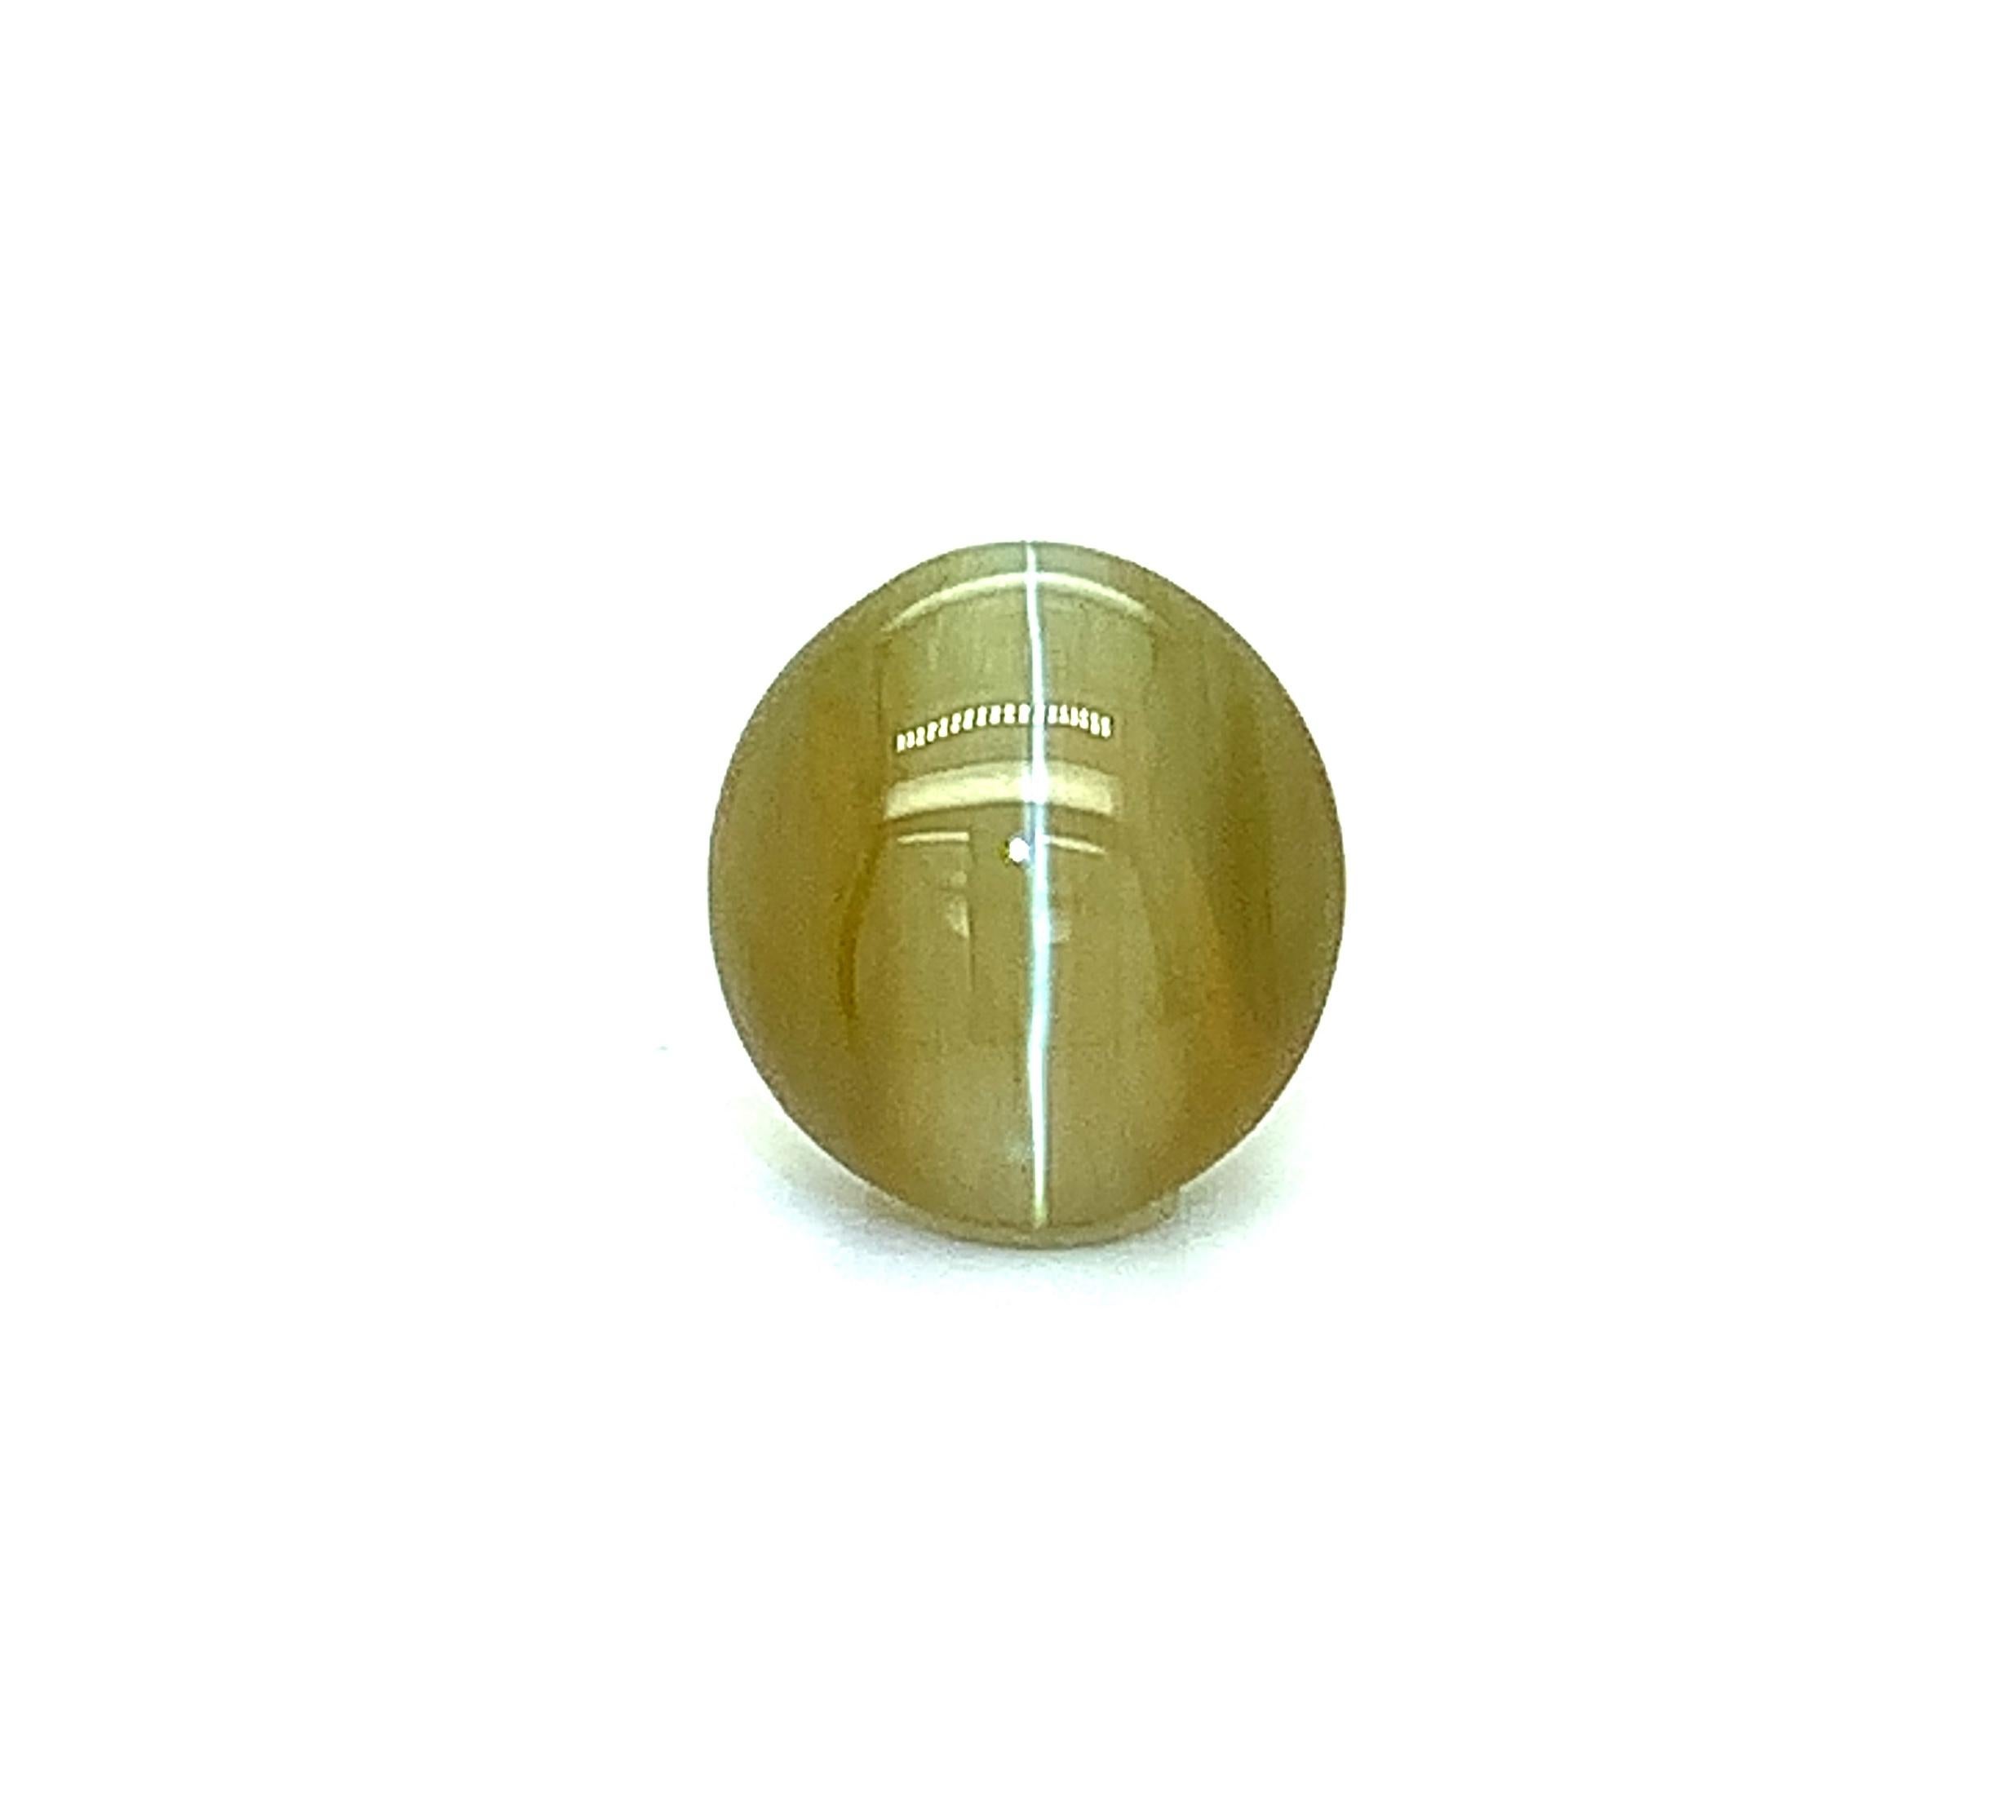 Cabochon 6.66 Carat Cat’s Eye Chrysoberyl, Unset Loose Gemstone, GIA Certified  For Sale